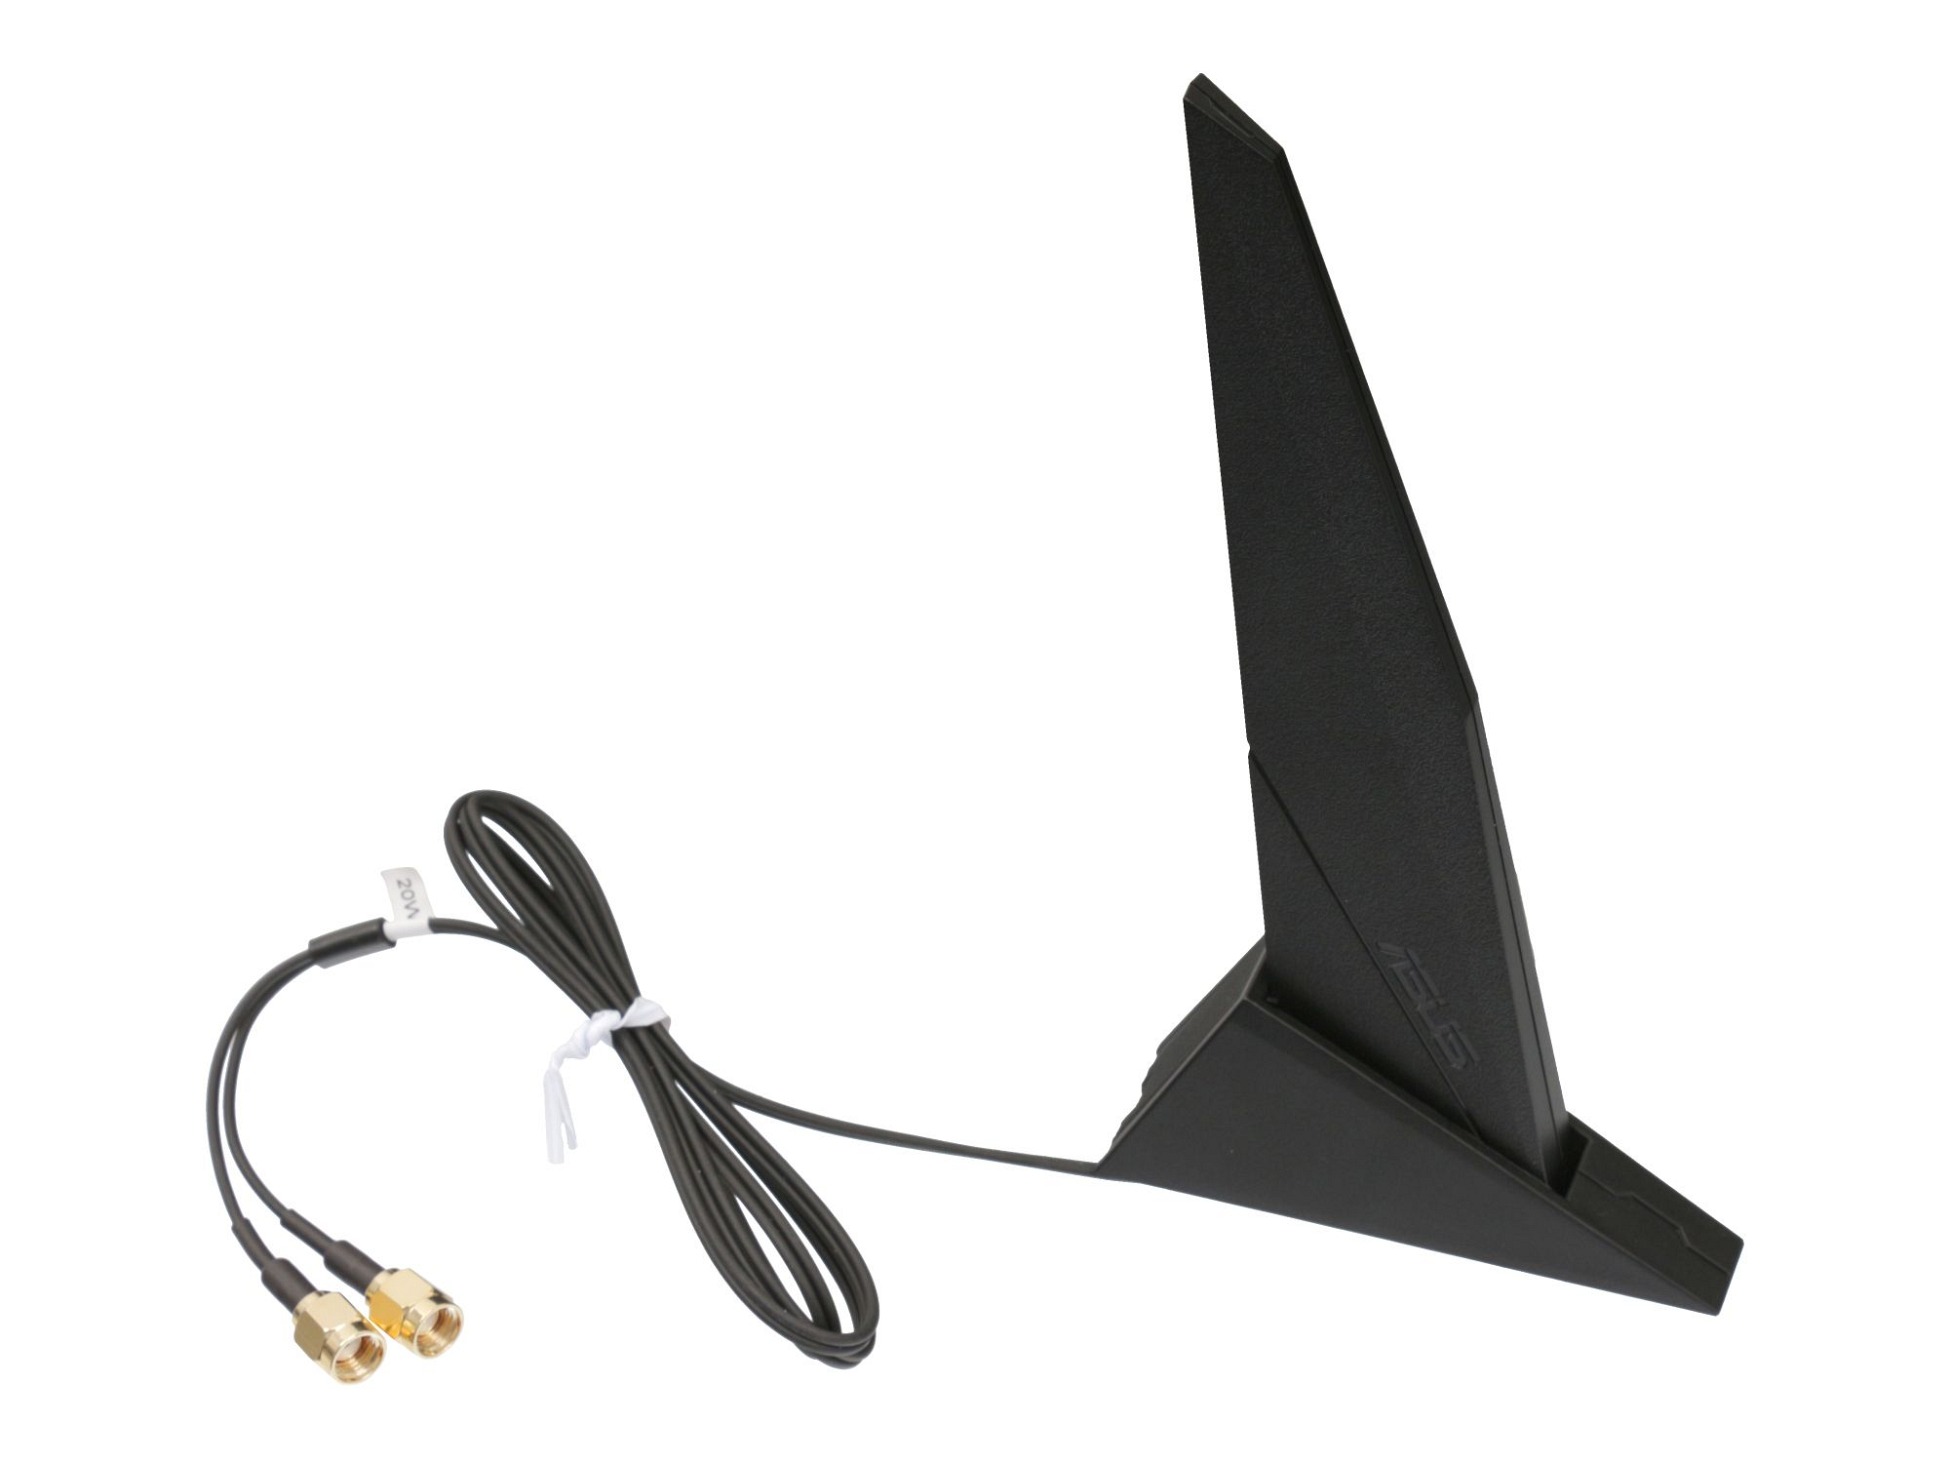 Asus 14008-02650400 Externe Asus RP-SMA DIPOLE Antenne